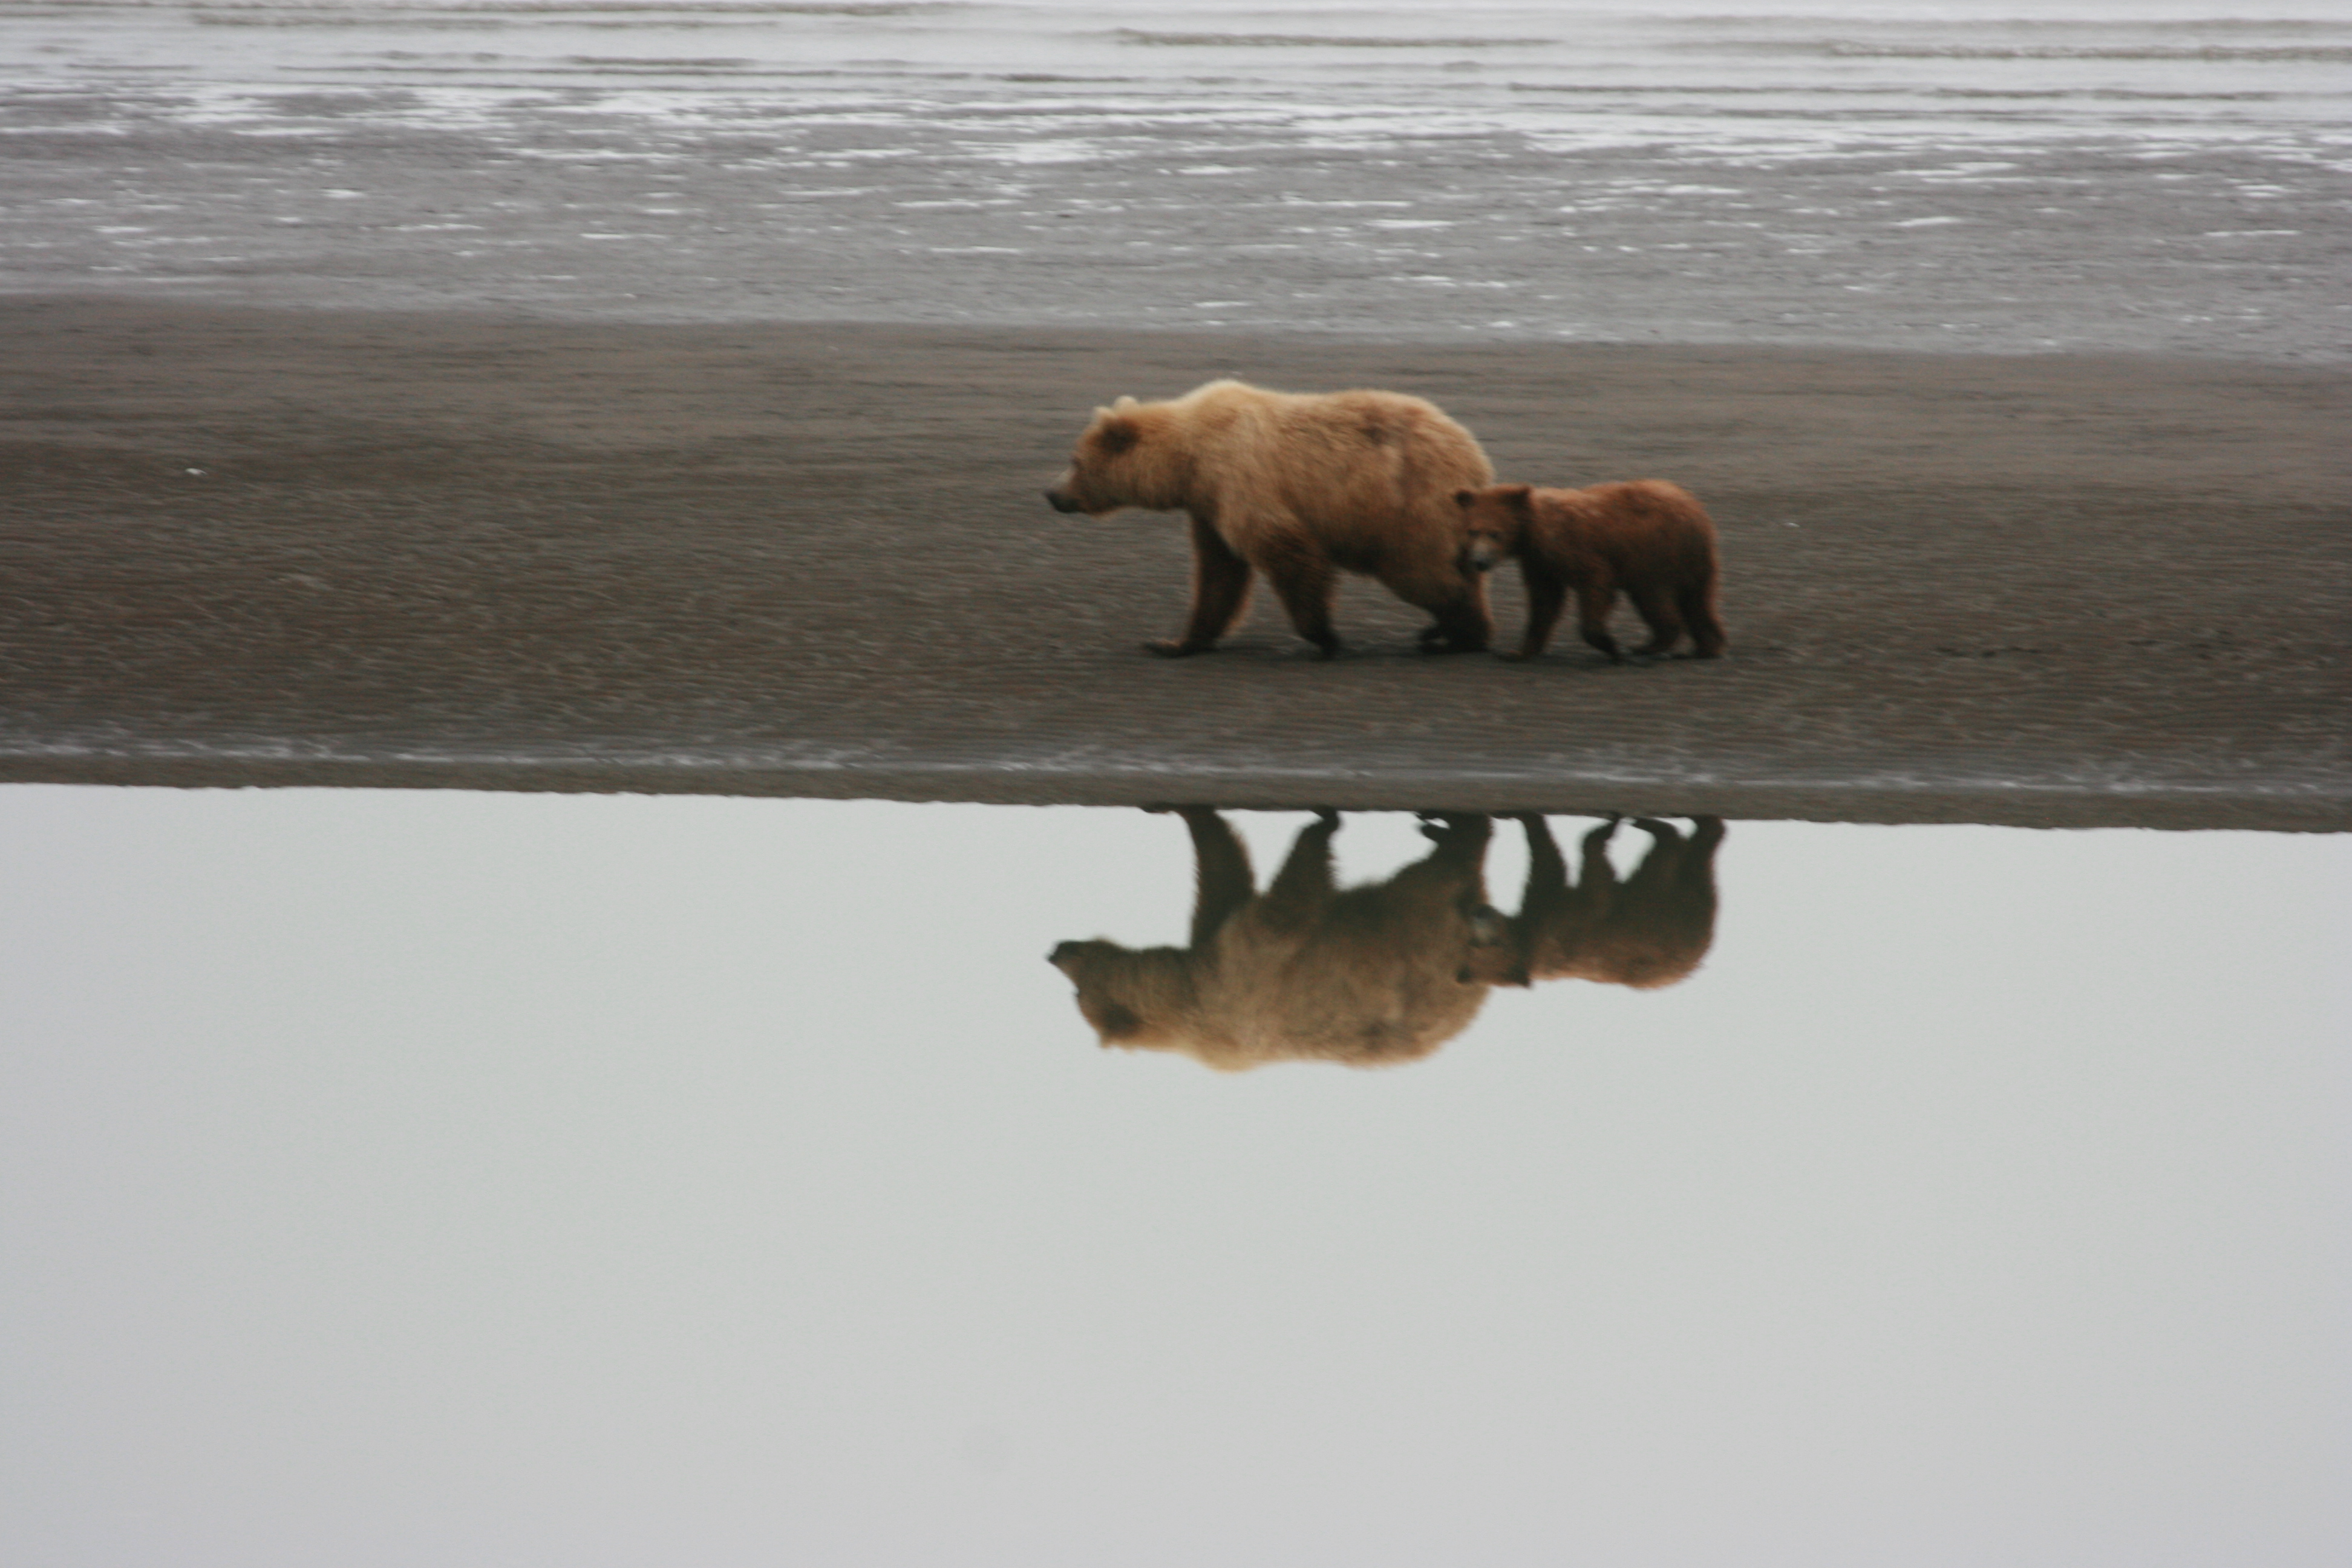 Mom and Cub going next to a tidal pool, in search of clams